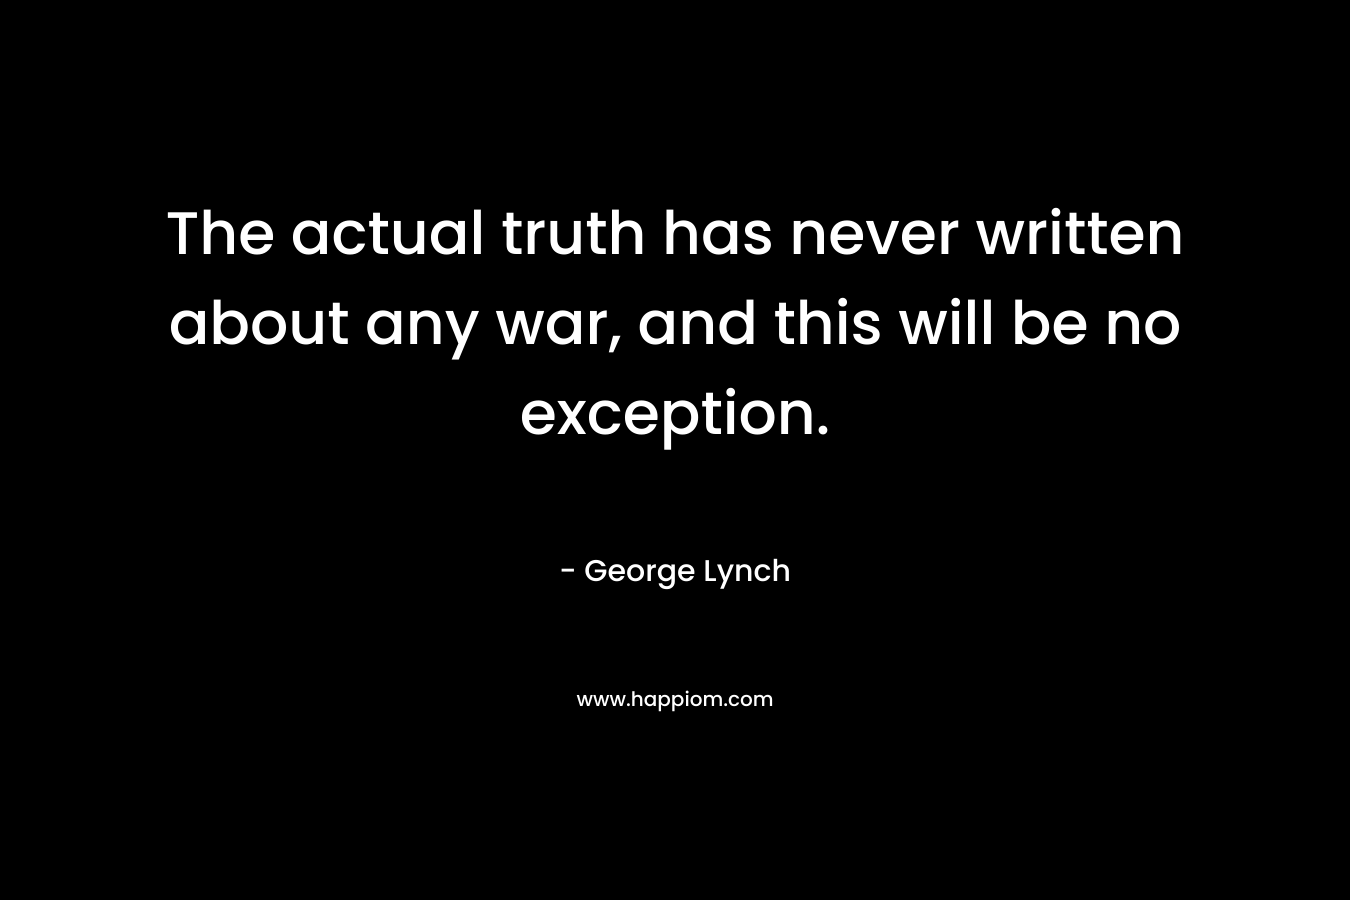 The actual truth has never written about any war, and this will be no exception. – George Lynch